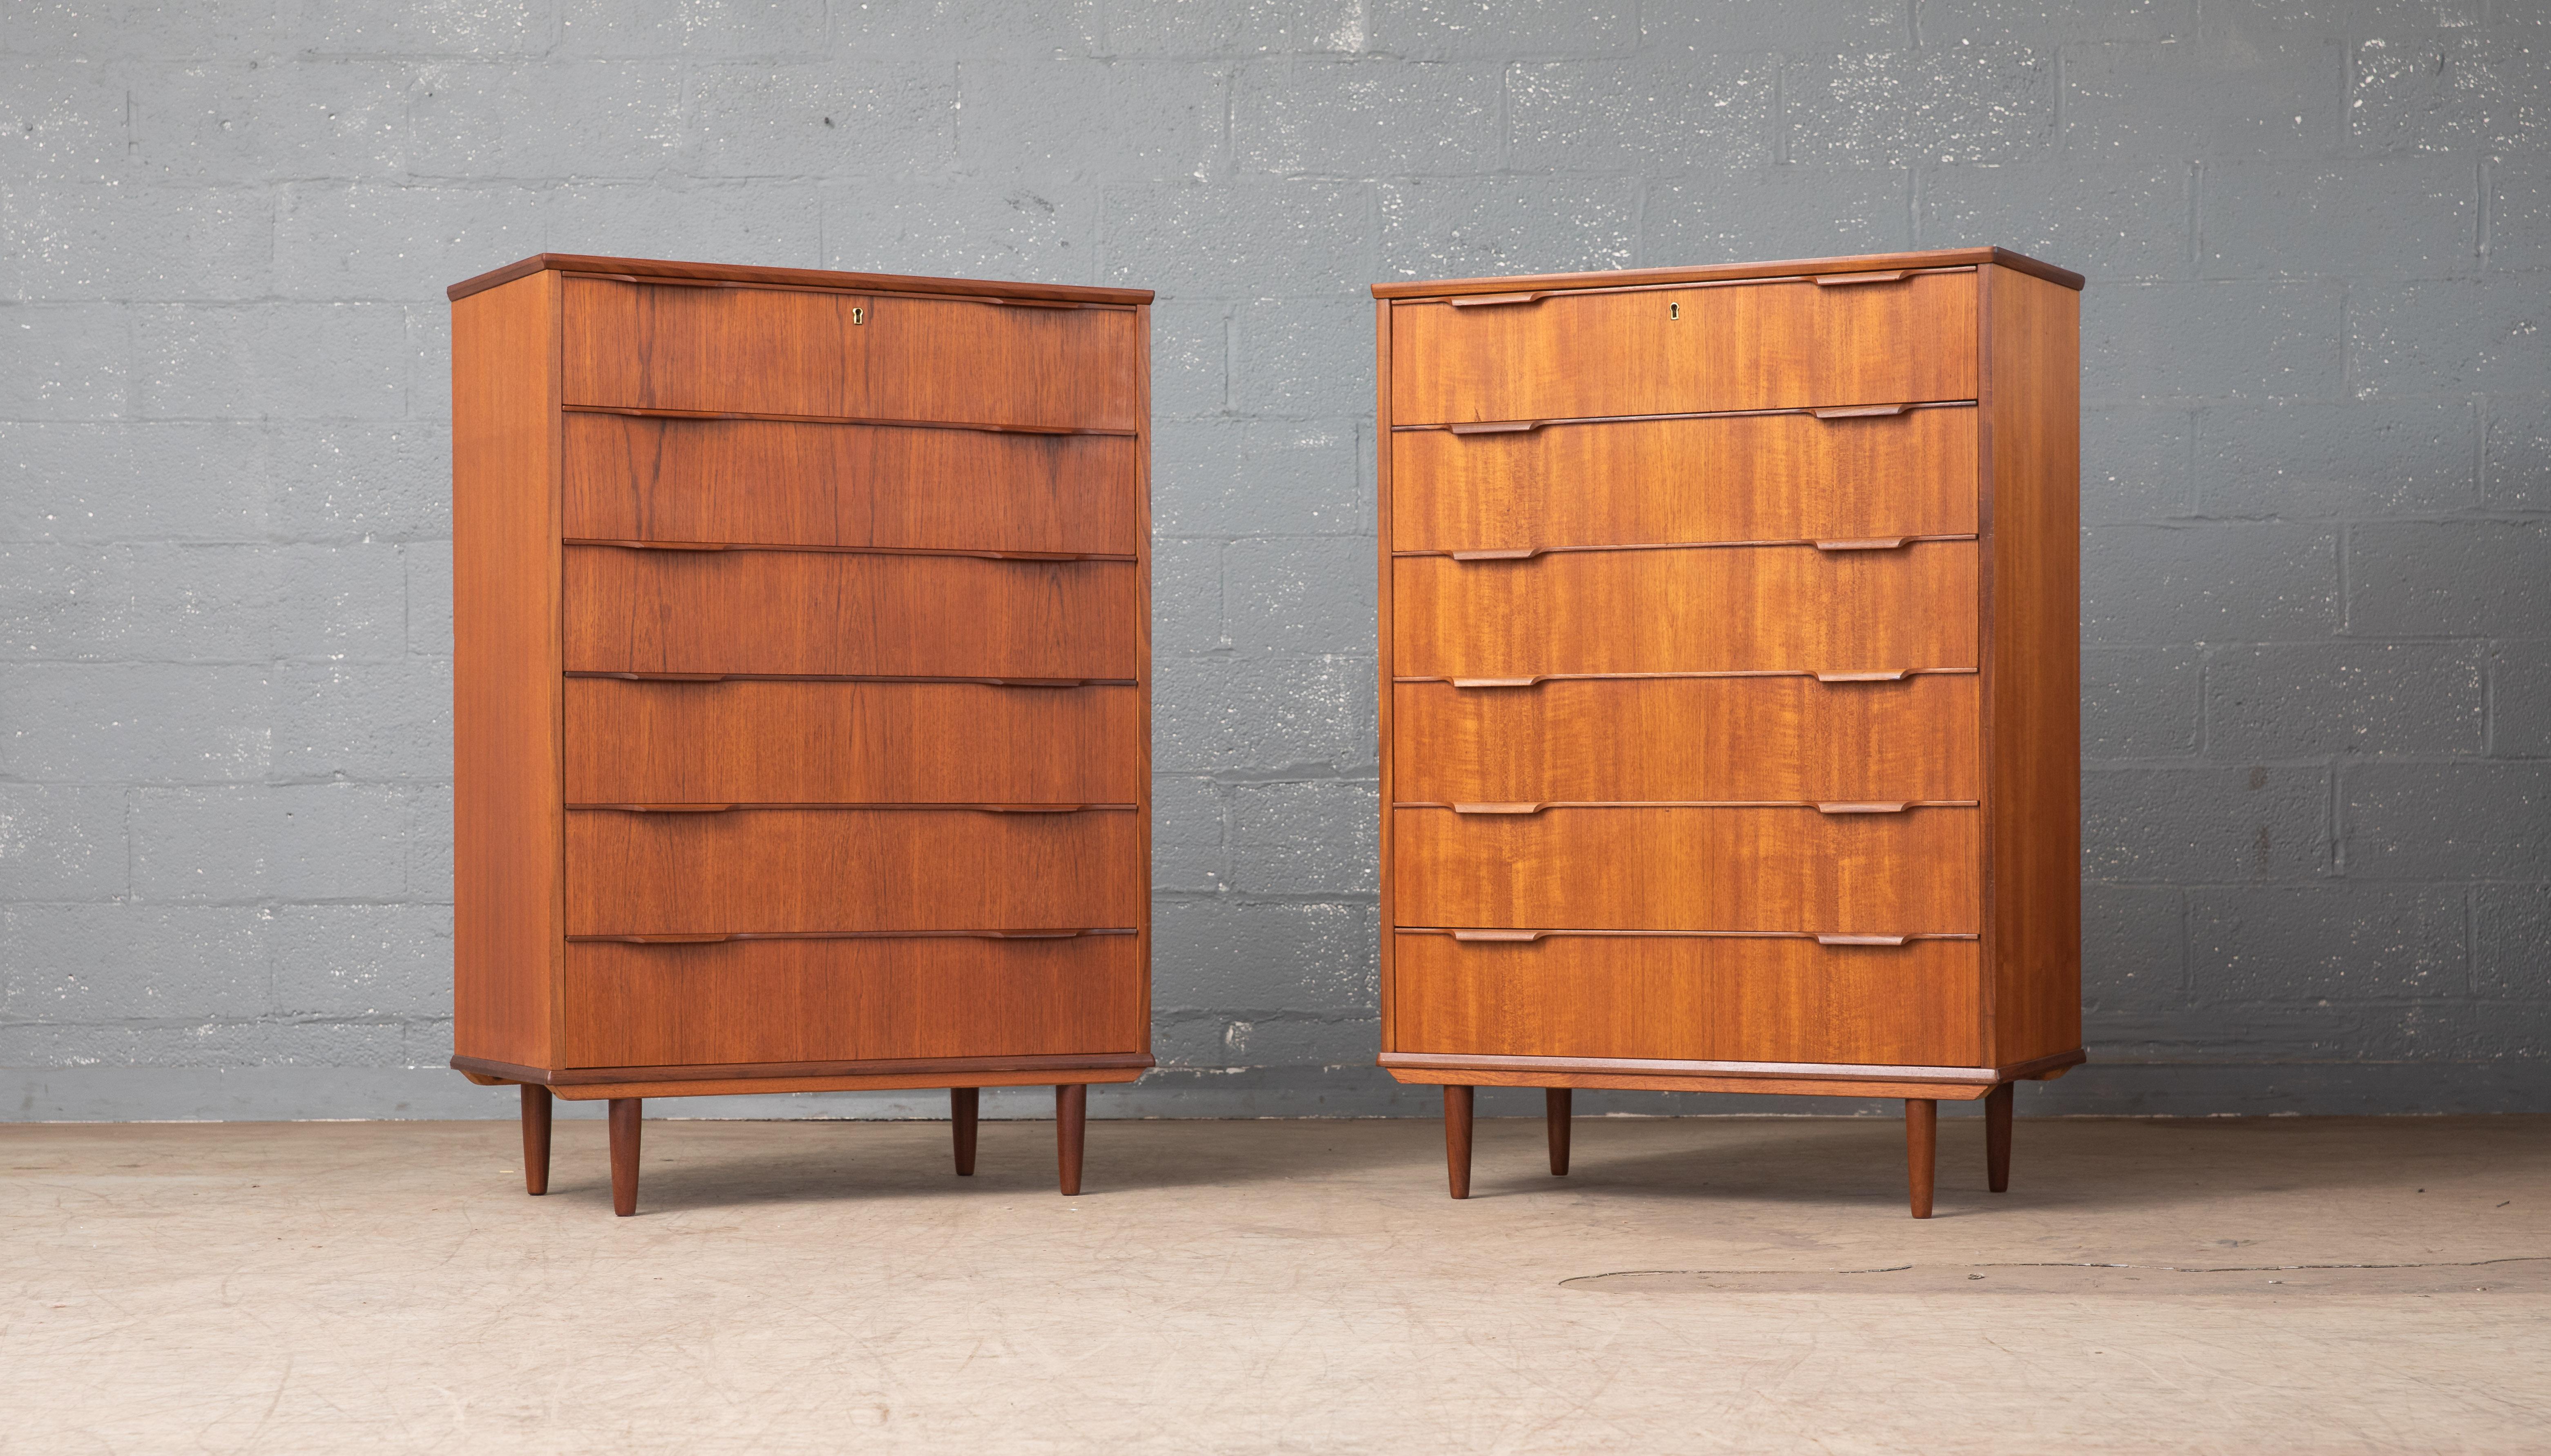 Beautiful Danish 1960s teak tall dresser or chest or drawers in the style of Kai Kristiansen. Sharp distinct design lines. Teak veneer with edges of solid teak and pulls carved from solid teak raised on solid tapered teak legs. Drawers made from